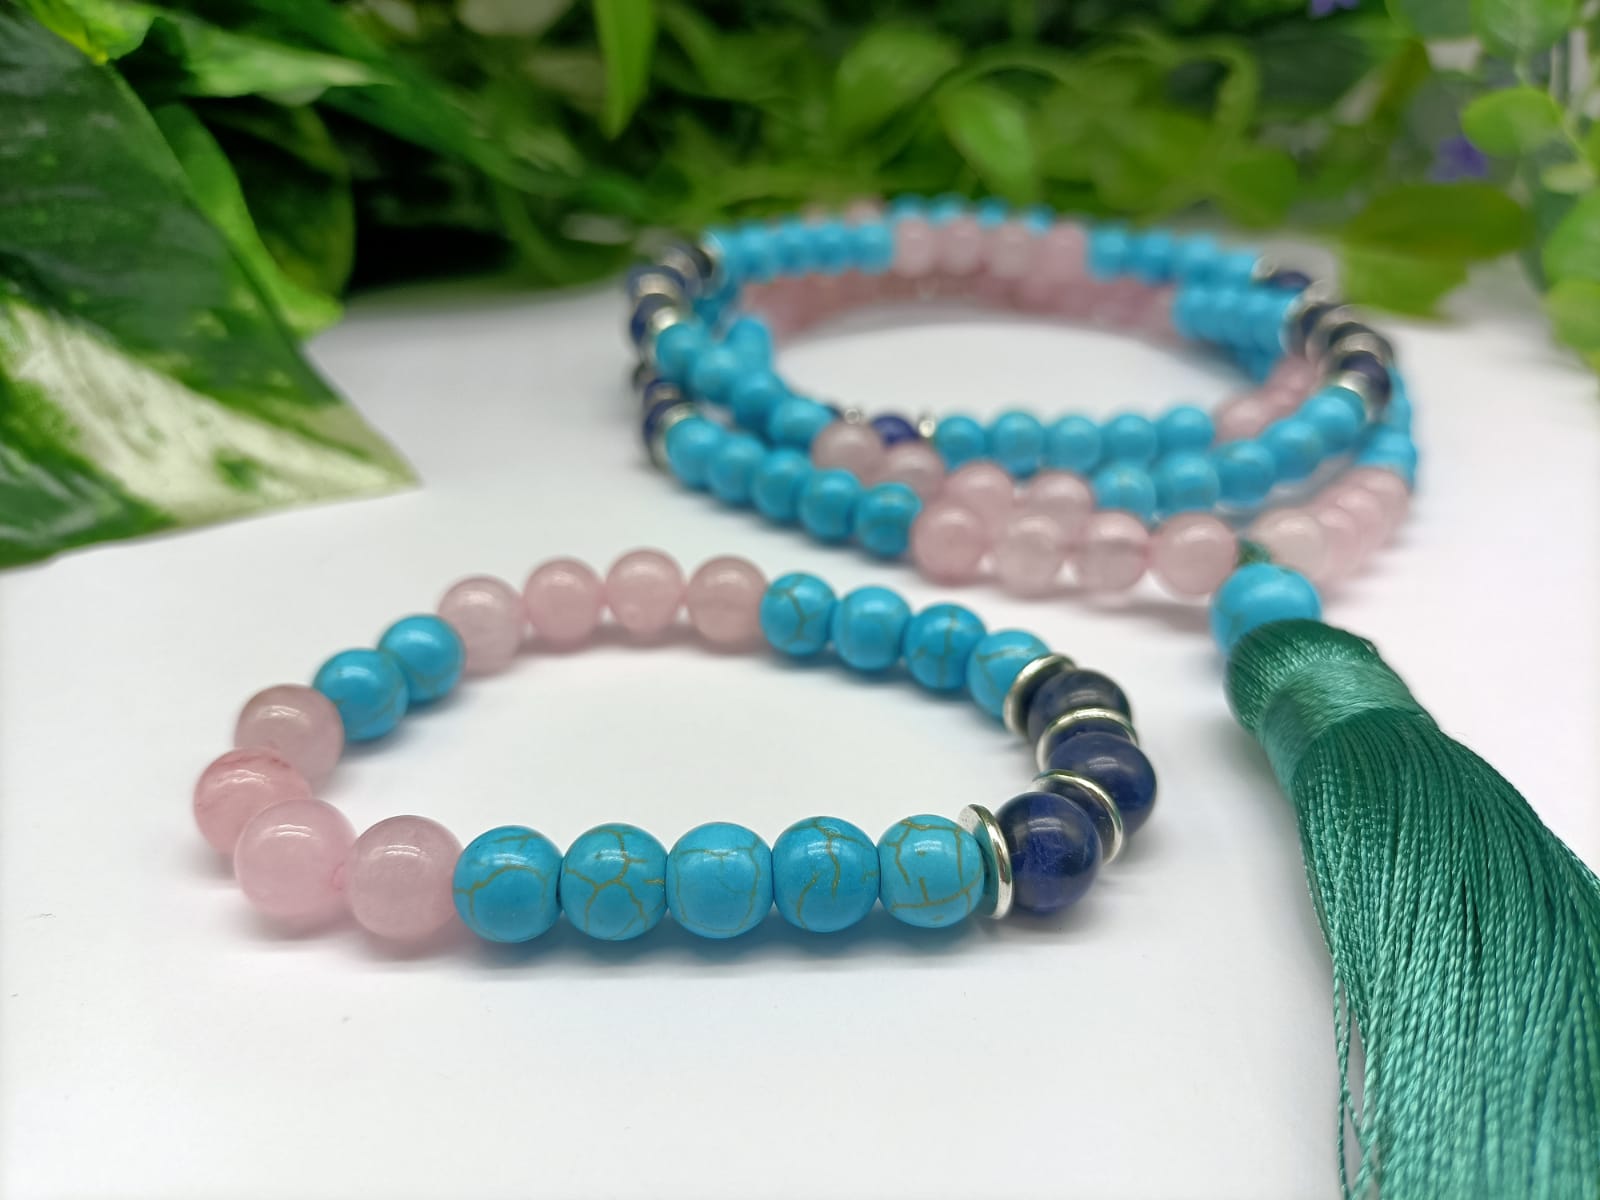 Rose Quartz and Blue Howlite Mala Beads 8mm with Bracelet Included Crystal Wellness